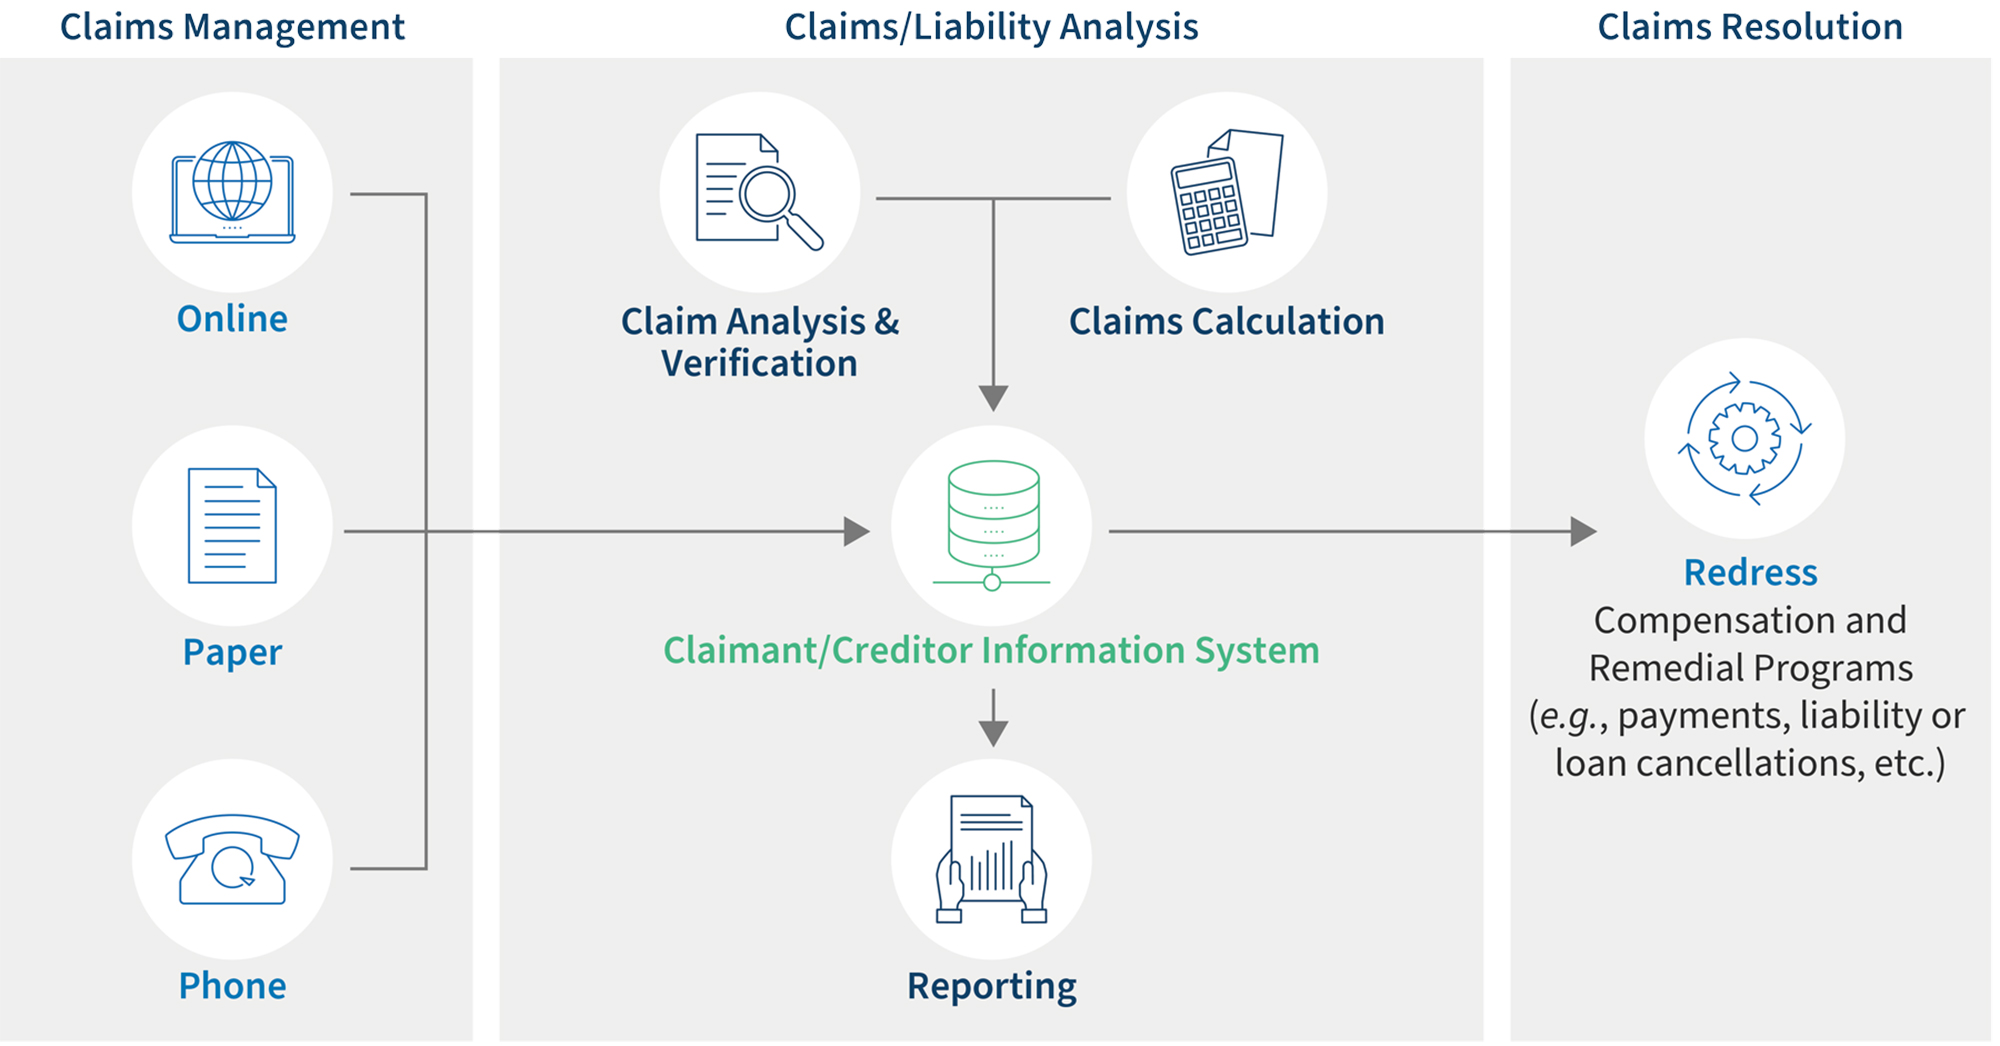 Full Suite of Claims Management Services